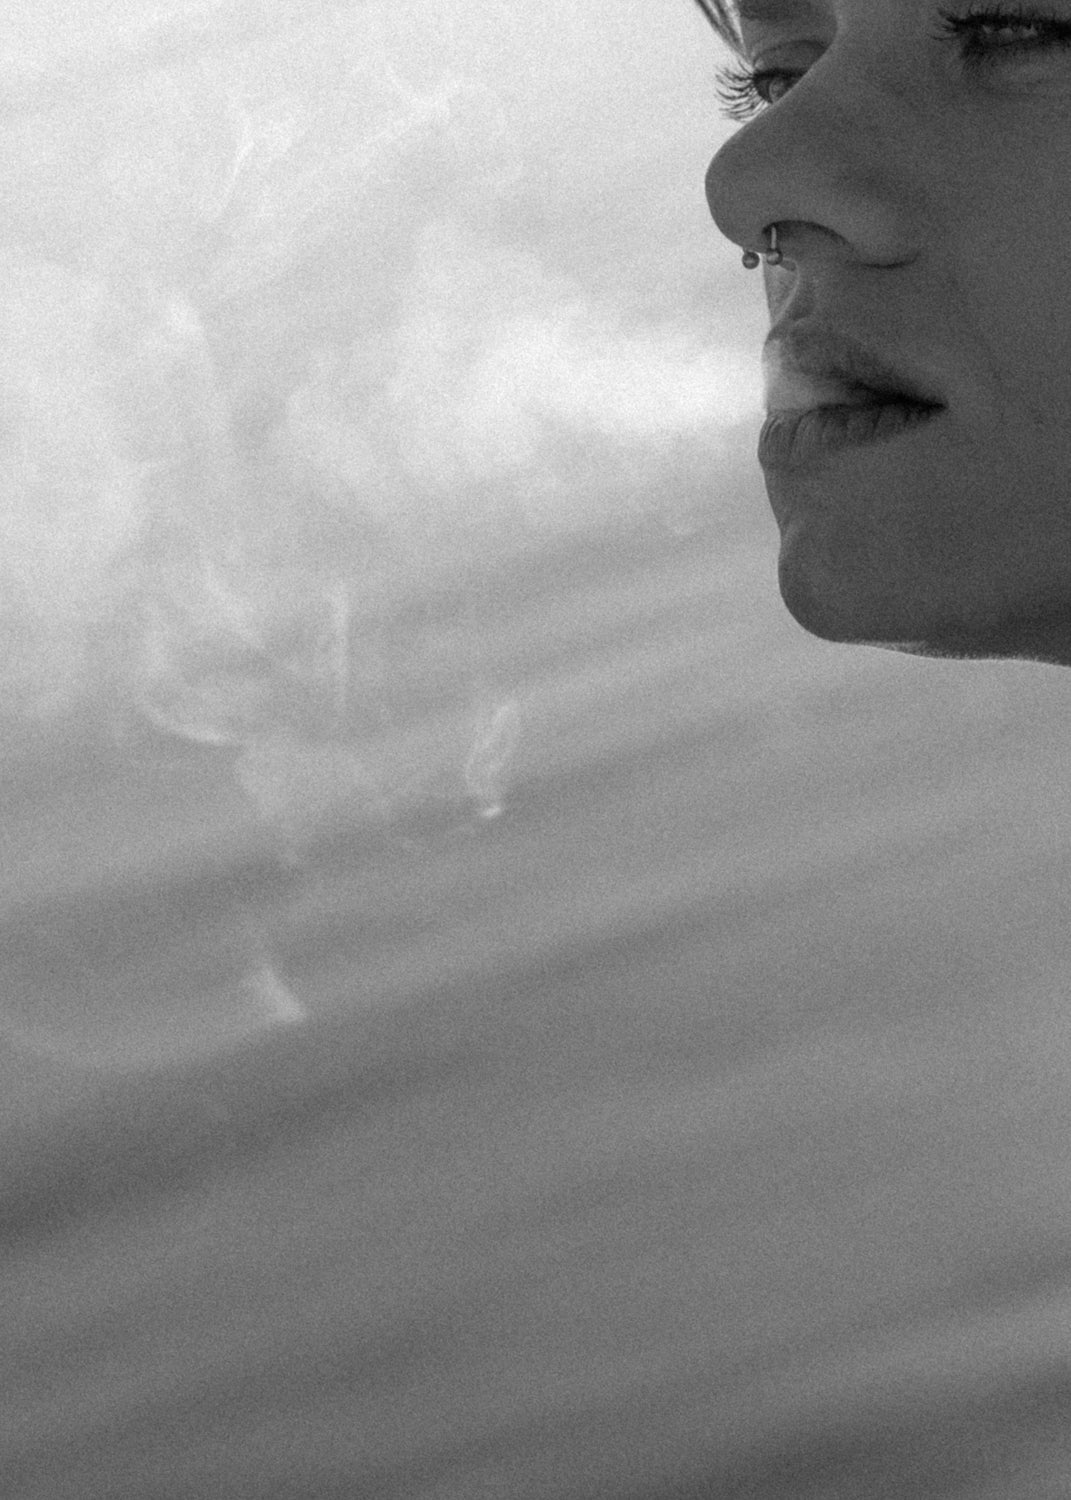 Non binary model exhaling smoke. The ocean is behind them. The photo is cropped so we only see their face in the top right corner. They are looking toward the left. Their body, ears, forehead and neck are cropped out.